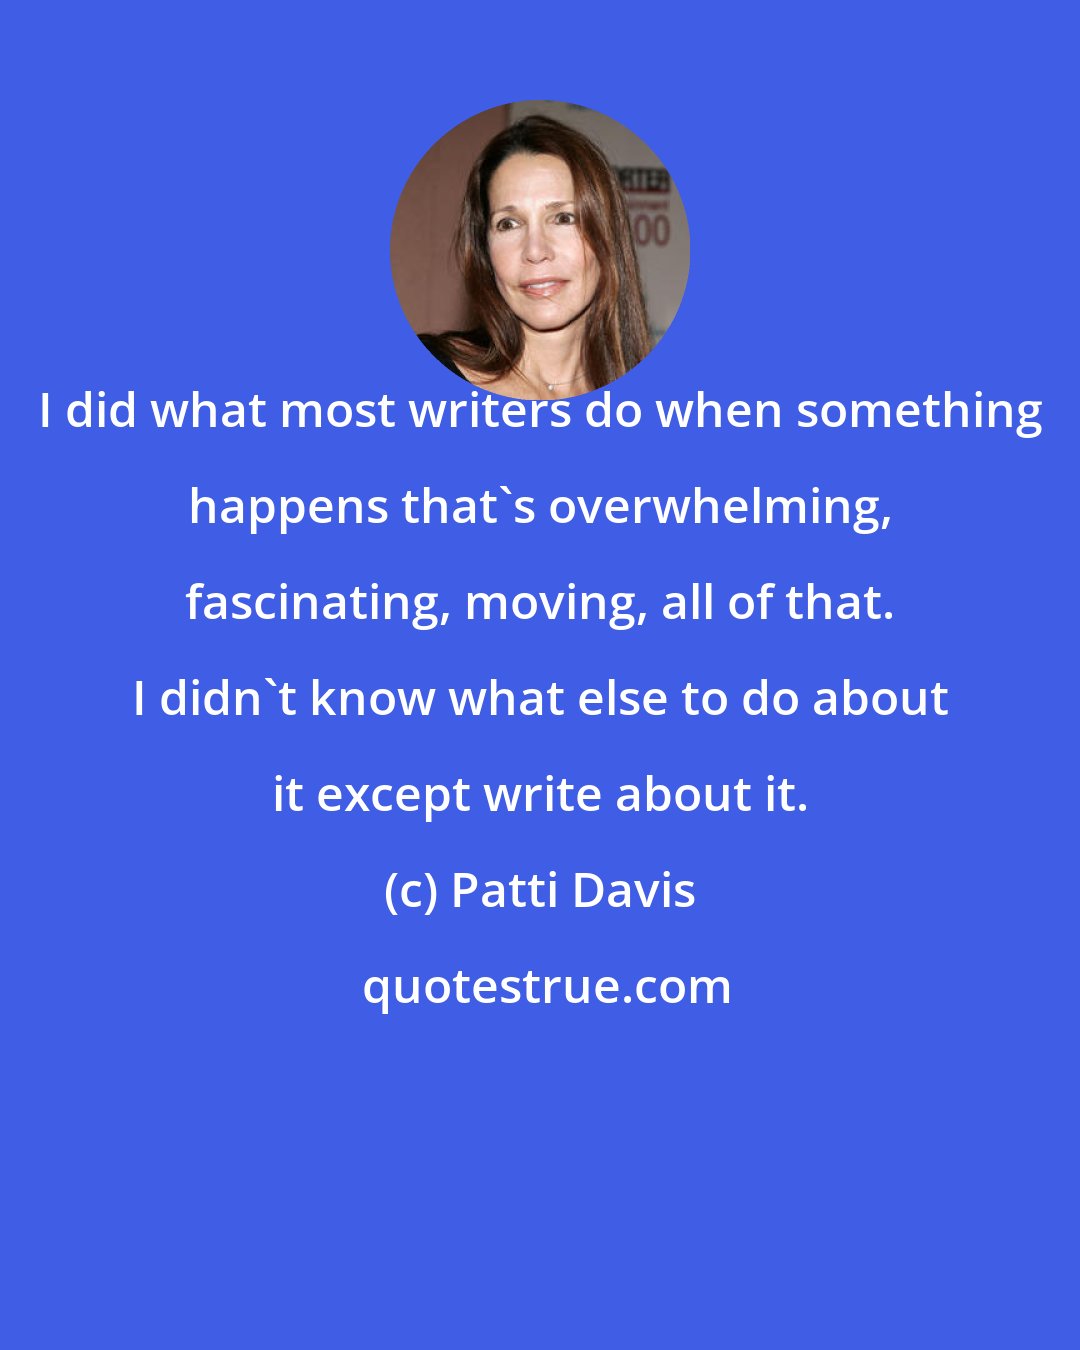 Patti Davis: I did what most writers do when something happens that's overwhelming, fascinating, moving, all of that. I didn't know what else to do about it except write about it.